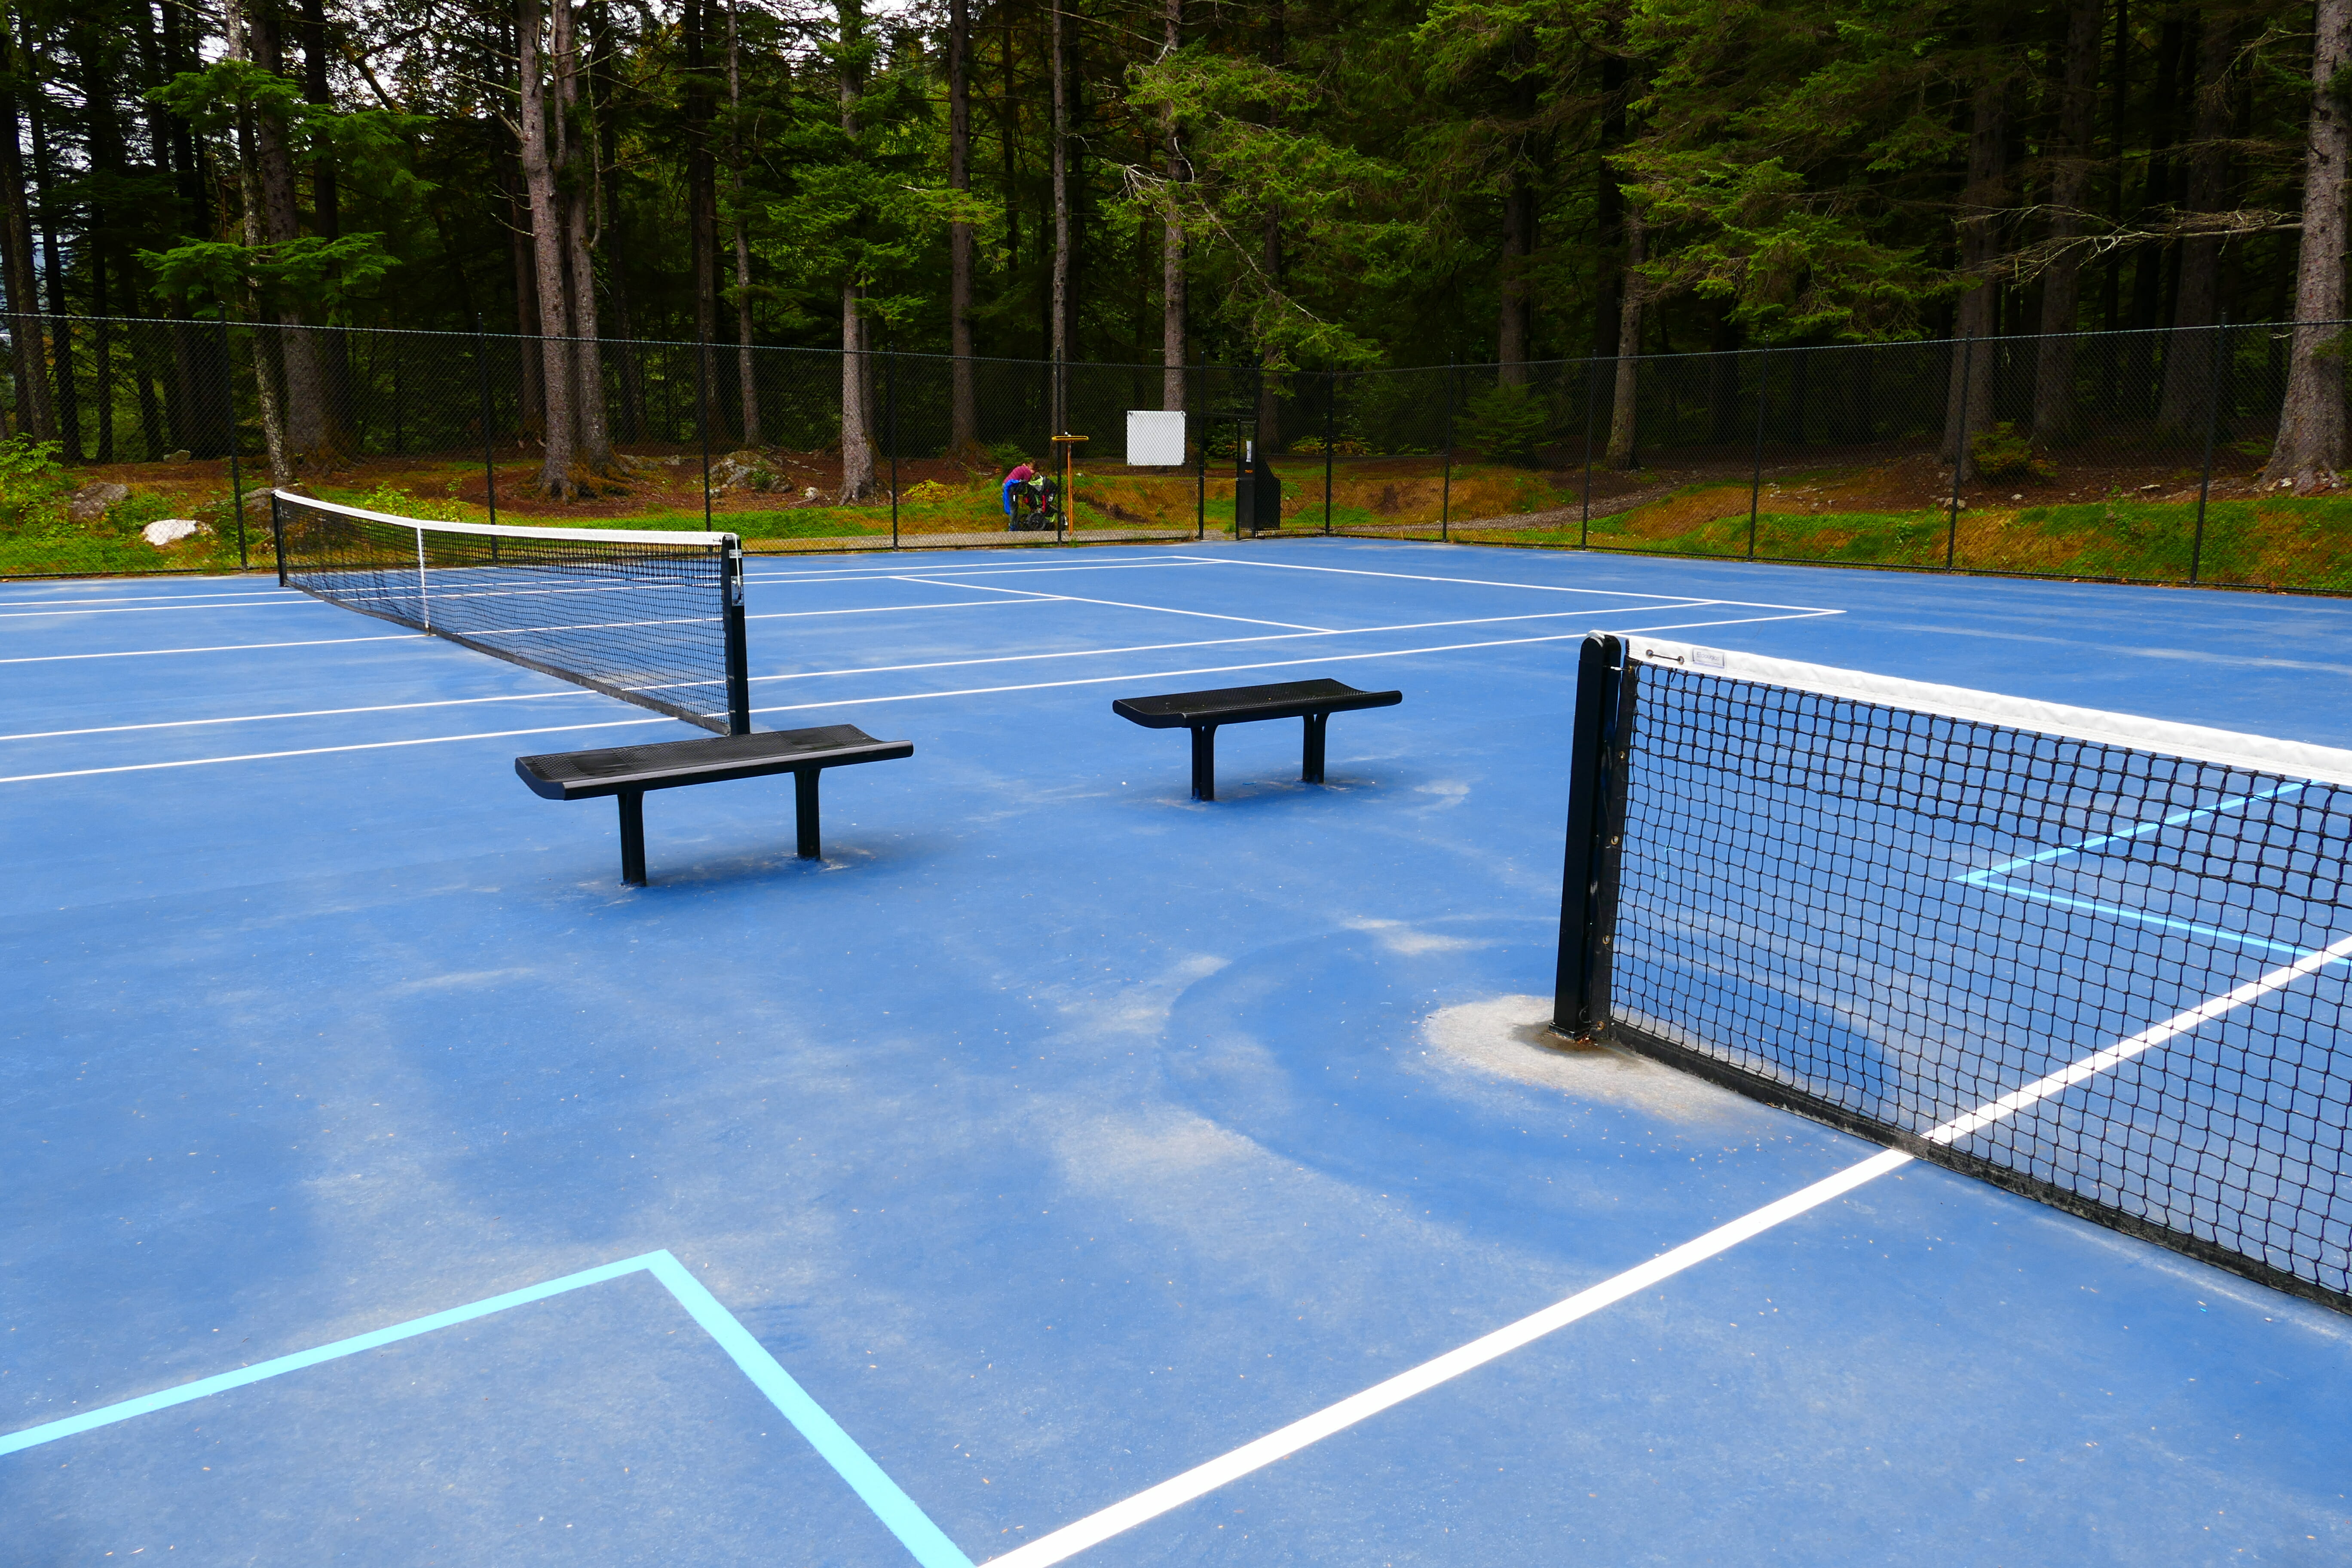 Tennis/Pickleball Courts in Cope Park